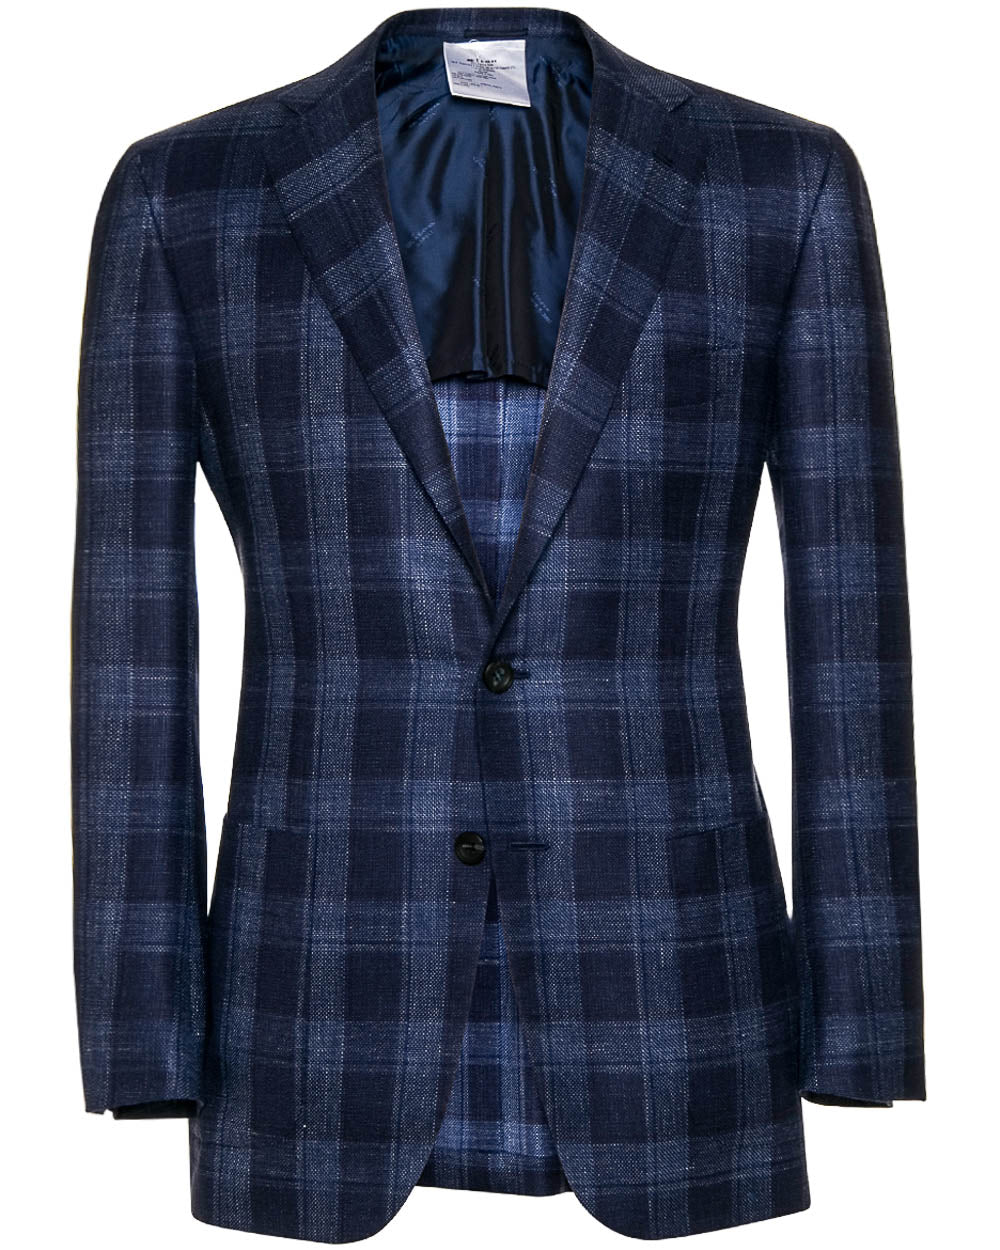 Dark Blue and Navy Plaid Sportcoat